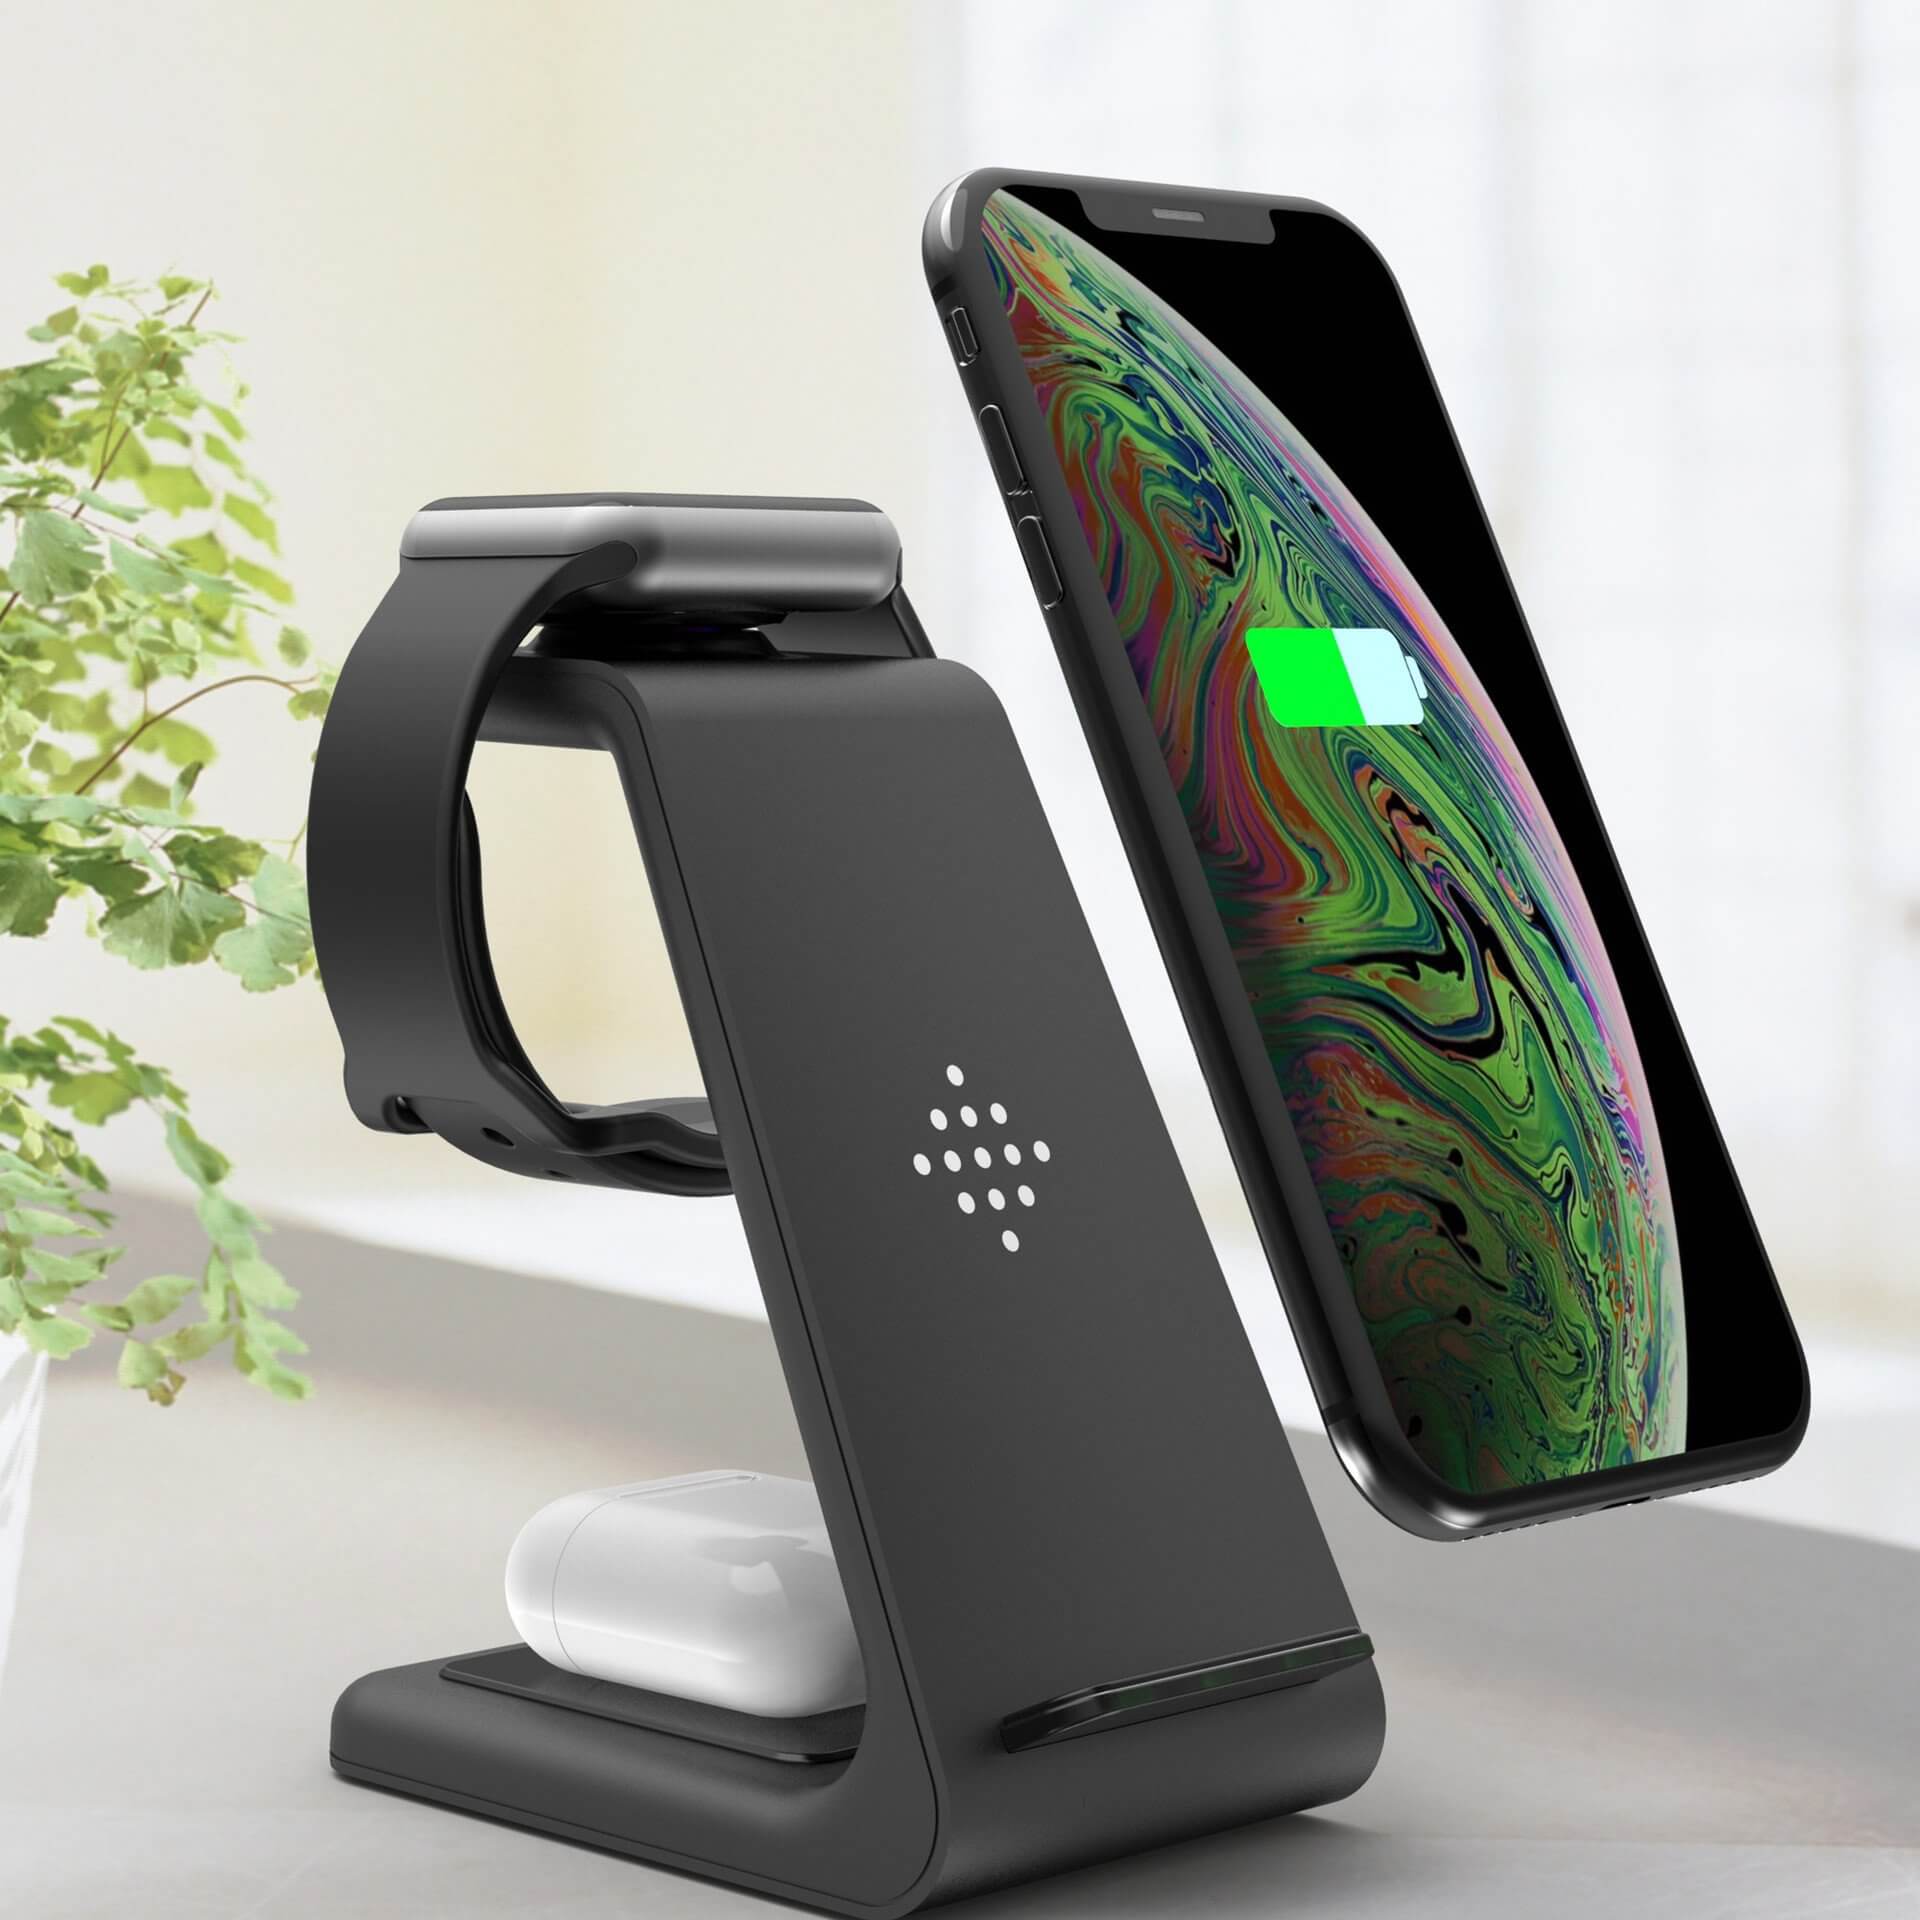 QueZoo 3-in-1 Wireless Charging Station